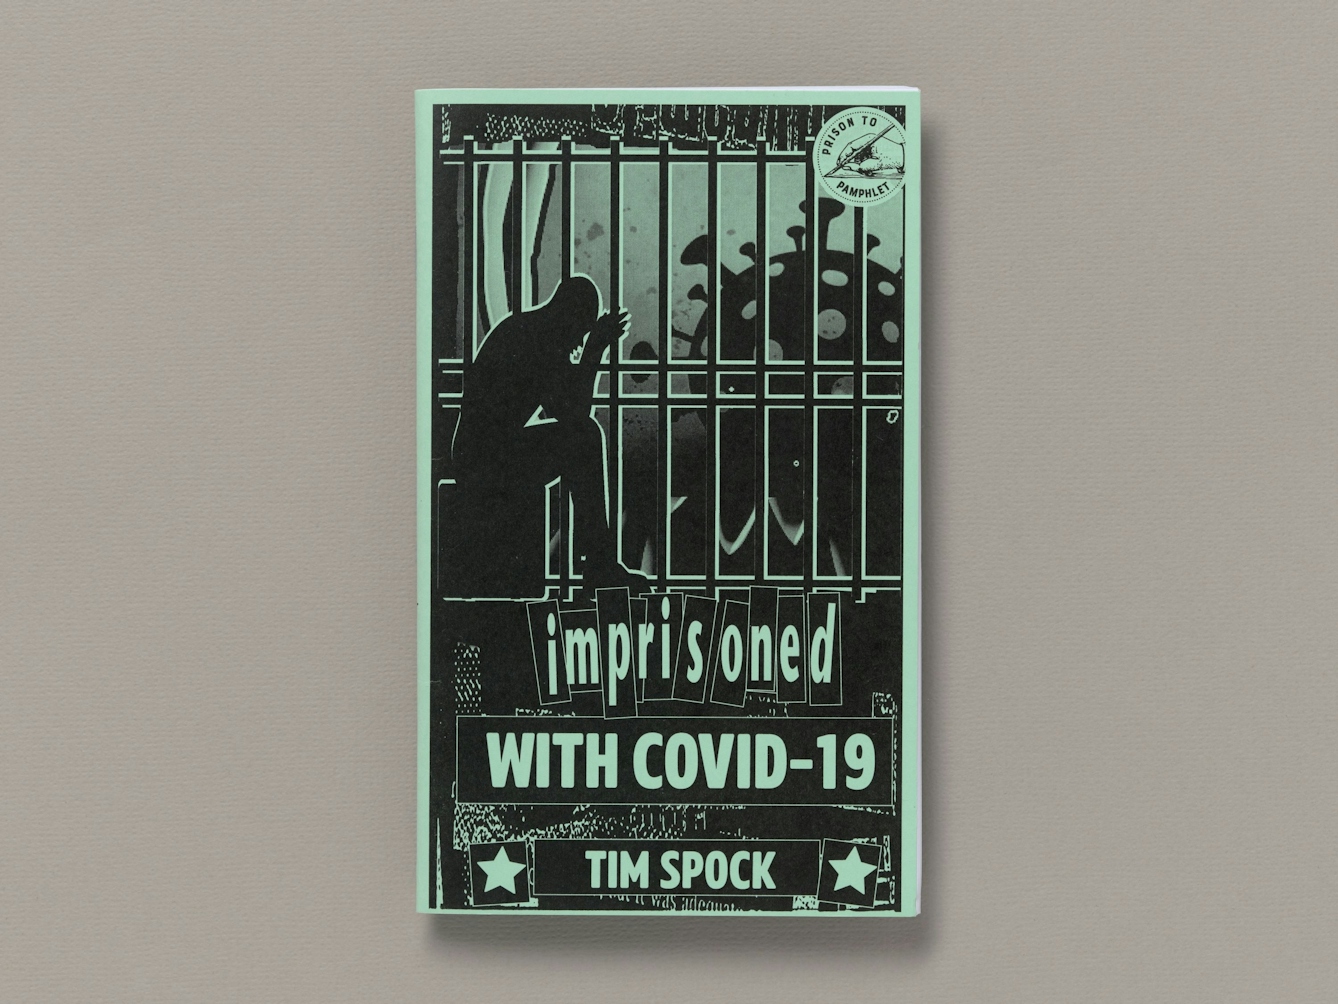 The front cover of a zine called "Imprisoned wiwth COVID-19' by Tim Spok. Teh cover shows the silohuette of a figure sat iwth his head in his hands behind prison bars. On the other side of the bars is the giant silohuette of the COVID-19 virus.